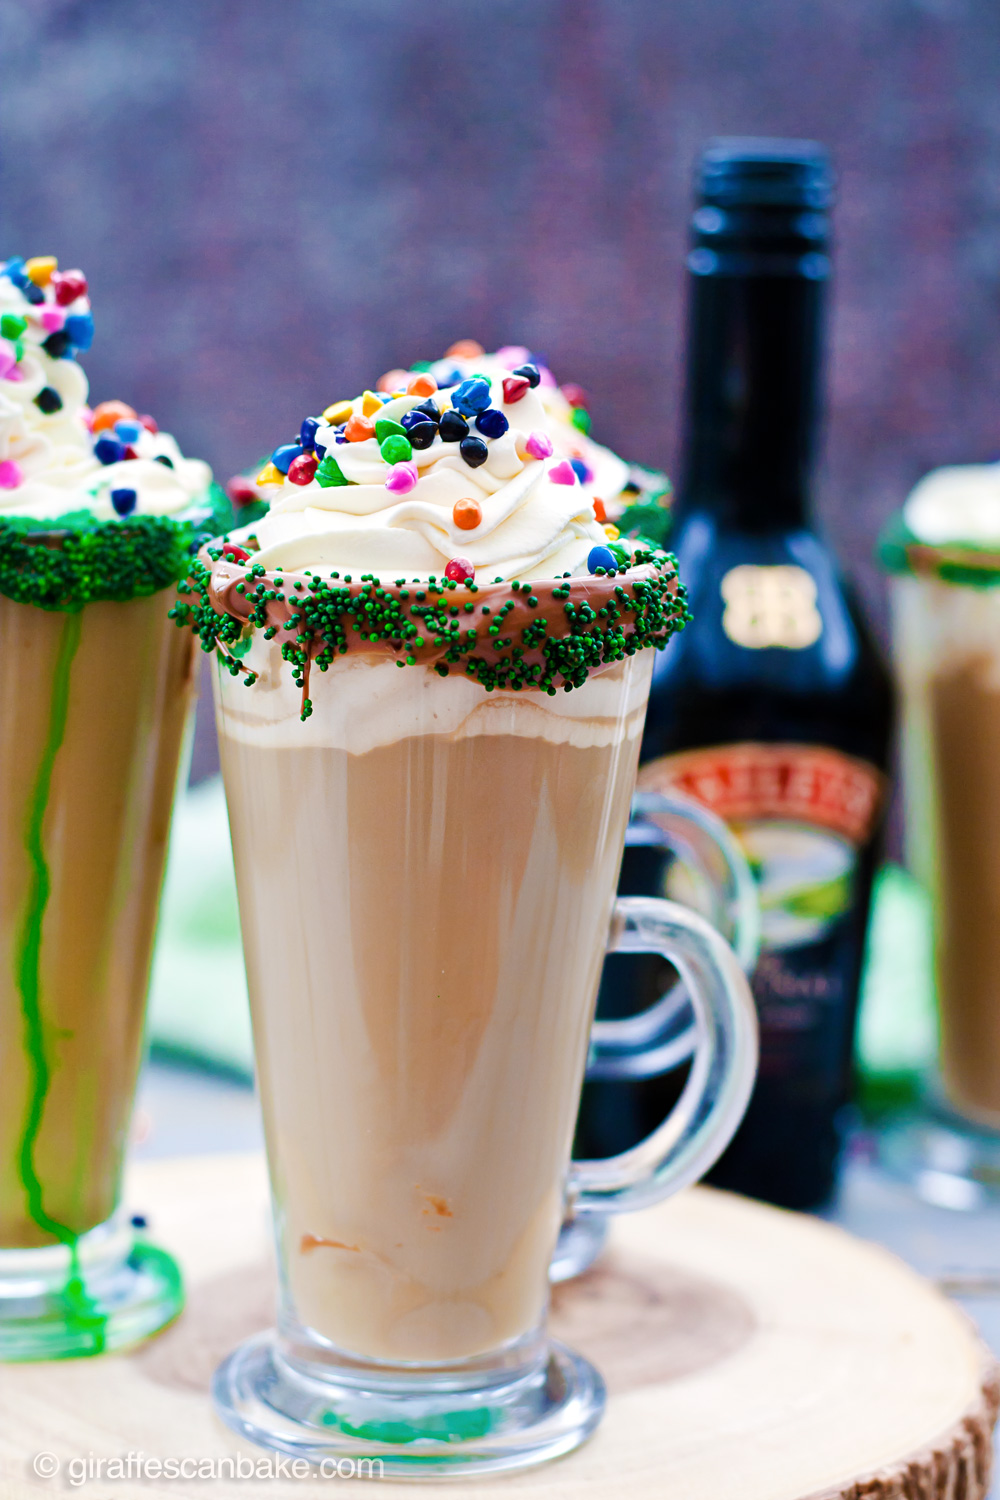 Mint Irish Latte - Put a little luck of the Irish in your morning coffee with this Mint Irish Latte. Crème de Menthe is combined with Baileys Irish Cream in a chocolate and sprinkles rimmed glass, rich espresso and frothy milk is then poured over the top. Add some vanilla whipped cream and rainbow sprinkles to finish it off with a touch of magic! The best way to drink coffee this St Patrick’s Day!